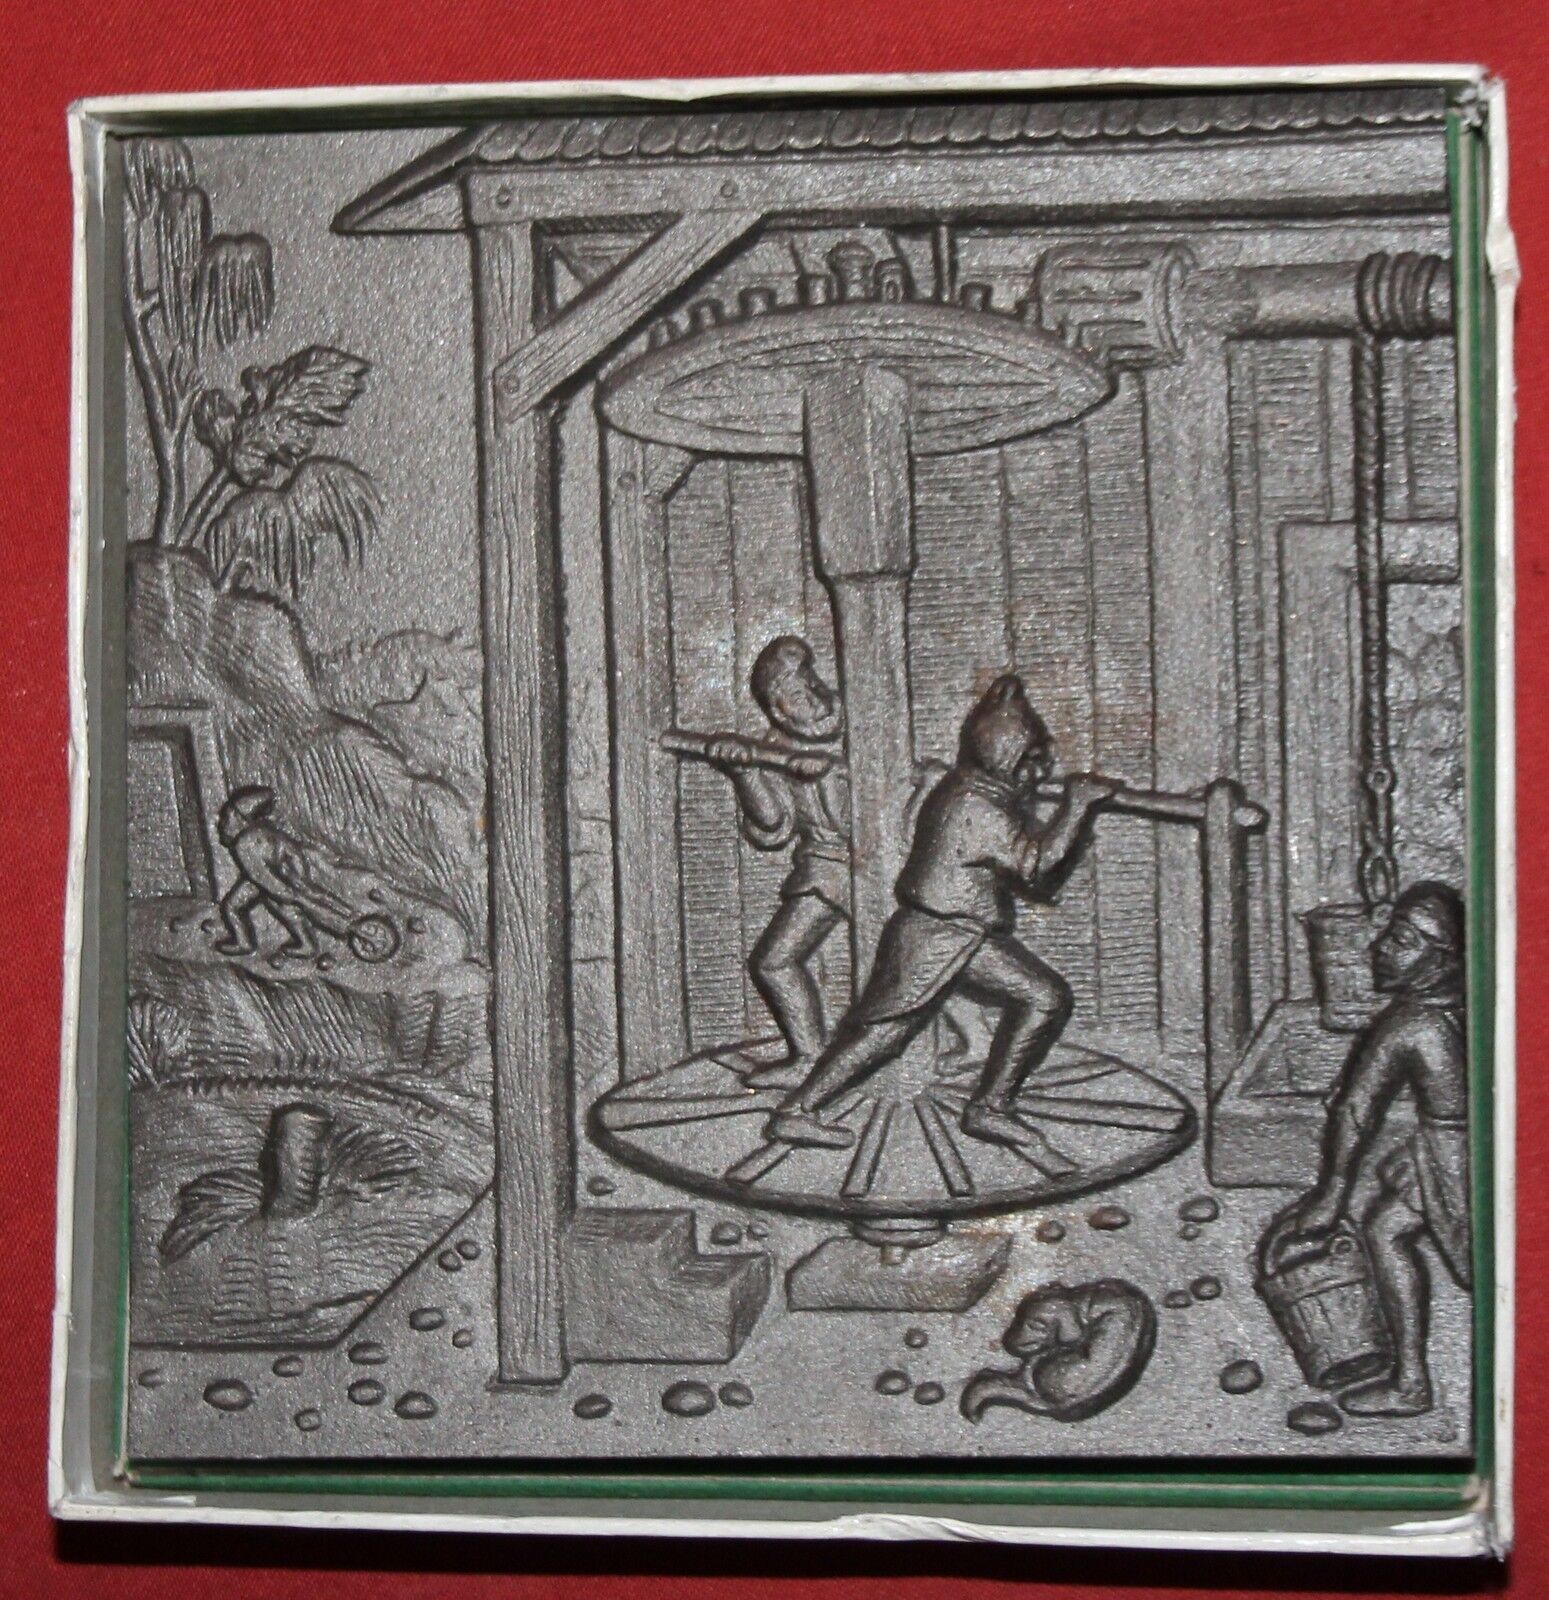 1988 German Eickhoff cast iron plaque with box charcoal mine